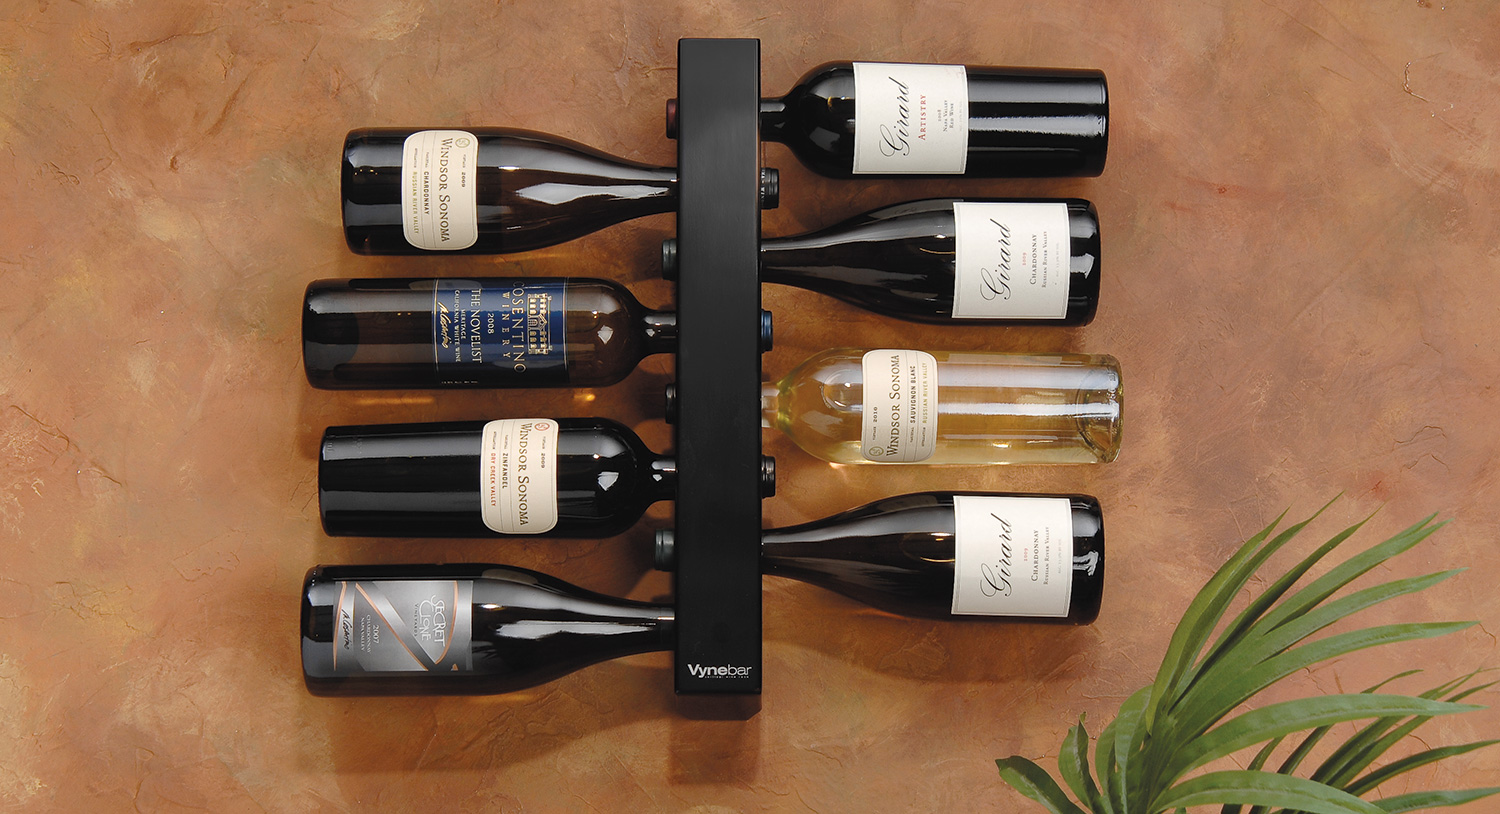 Chic and innovative, the Vynebar Vertical Racks are designed to eliminate countertop clutter and display wine in a unique, fun and stylish way.